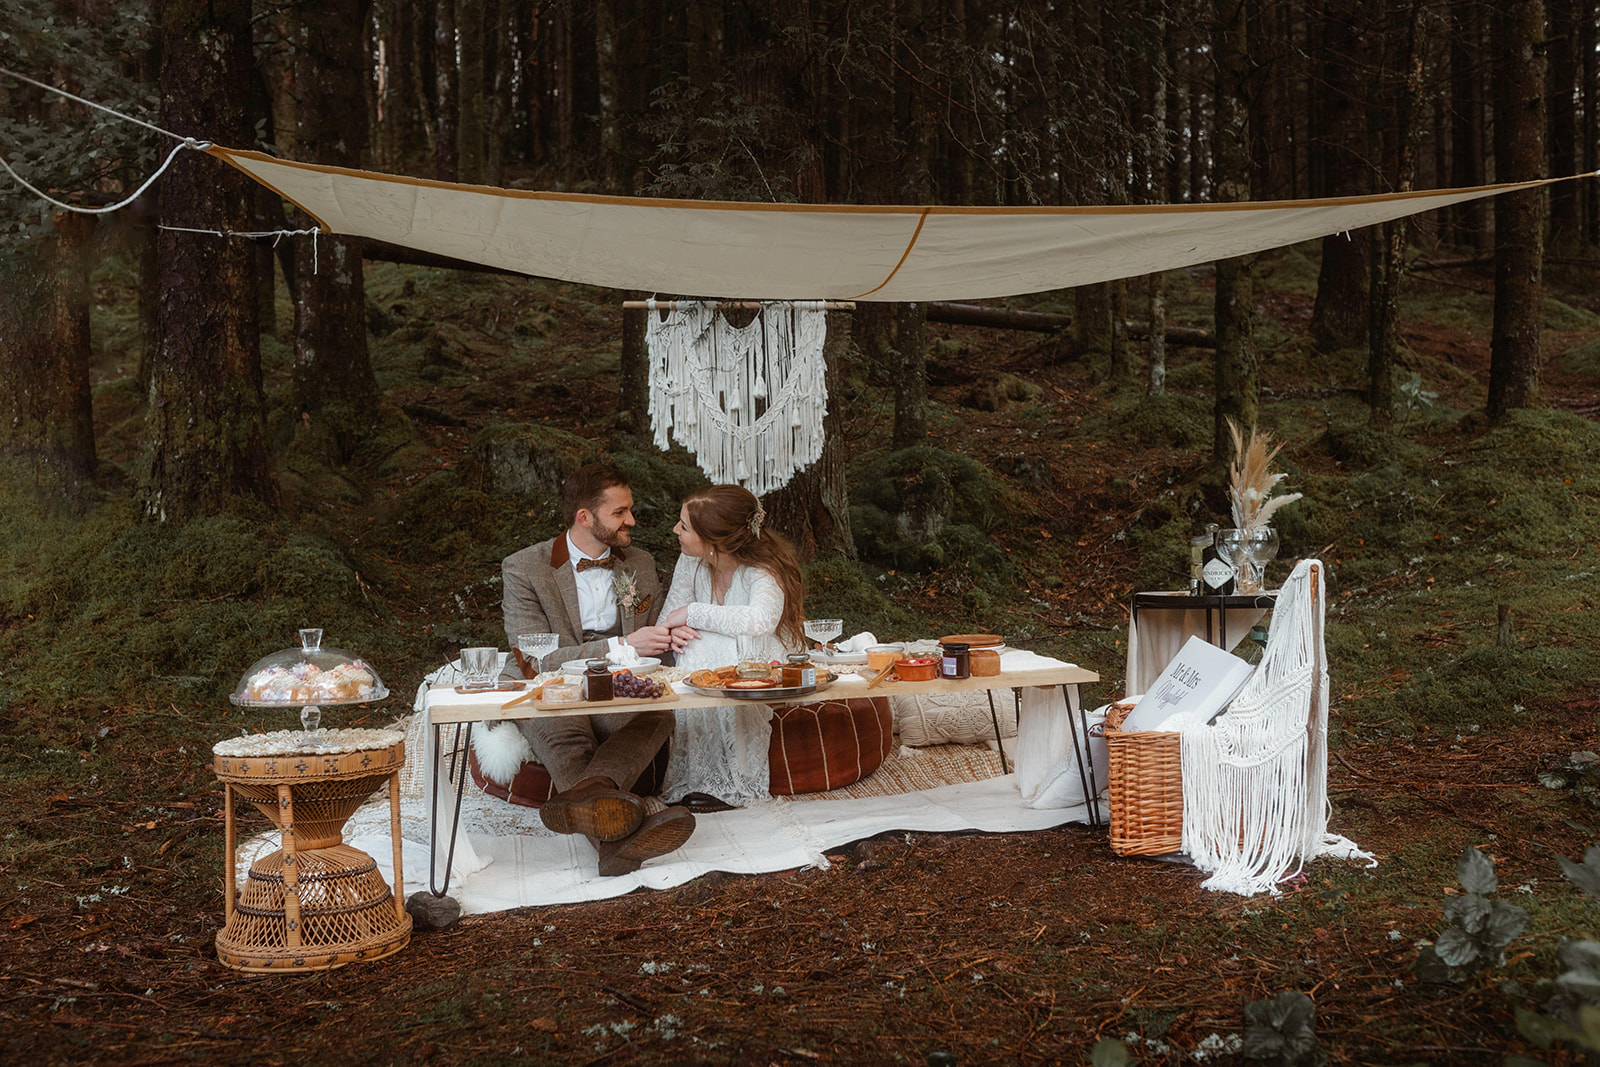 Holly and James had a picnic at the beautiful Glencoe Lochan after their elopement ceremony.